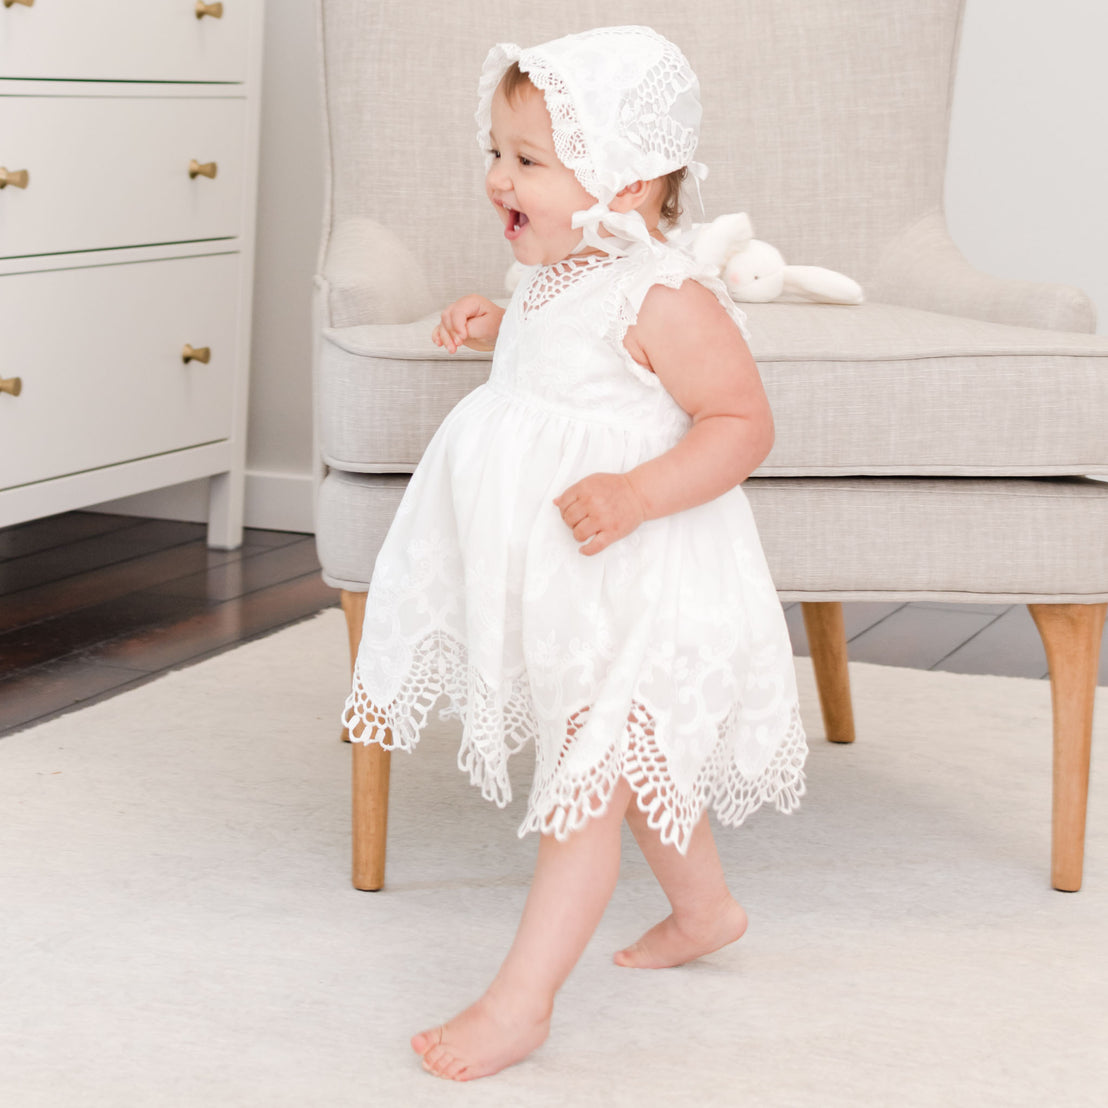 Baby walking and smiling as she wears a christening romper dress